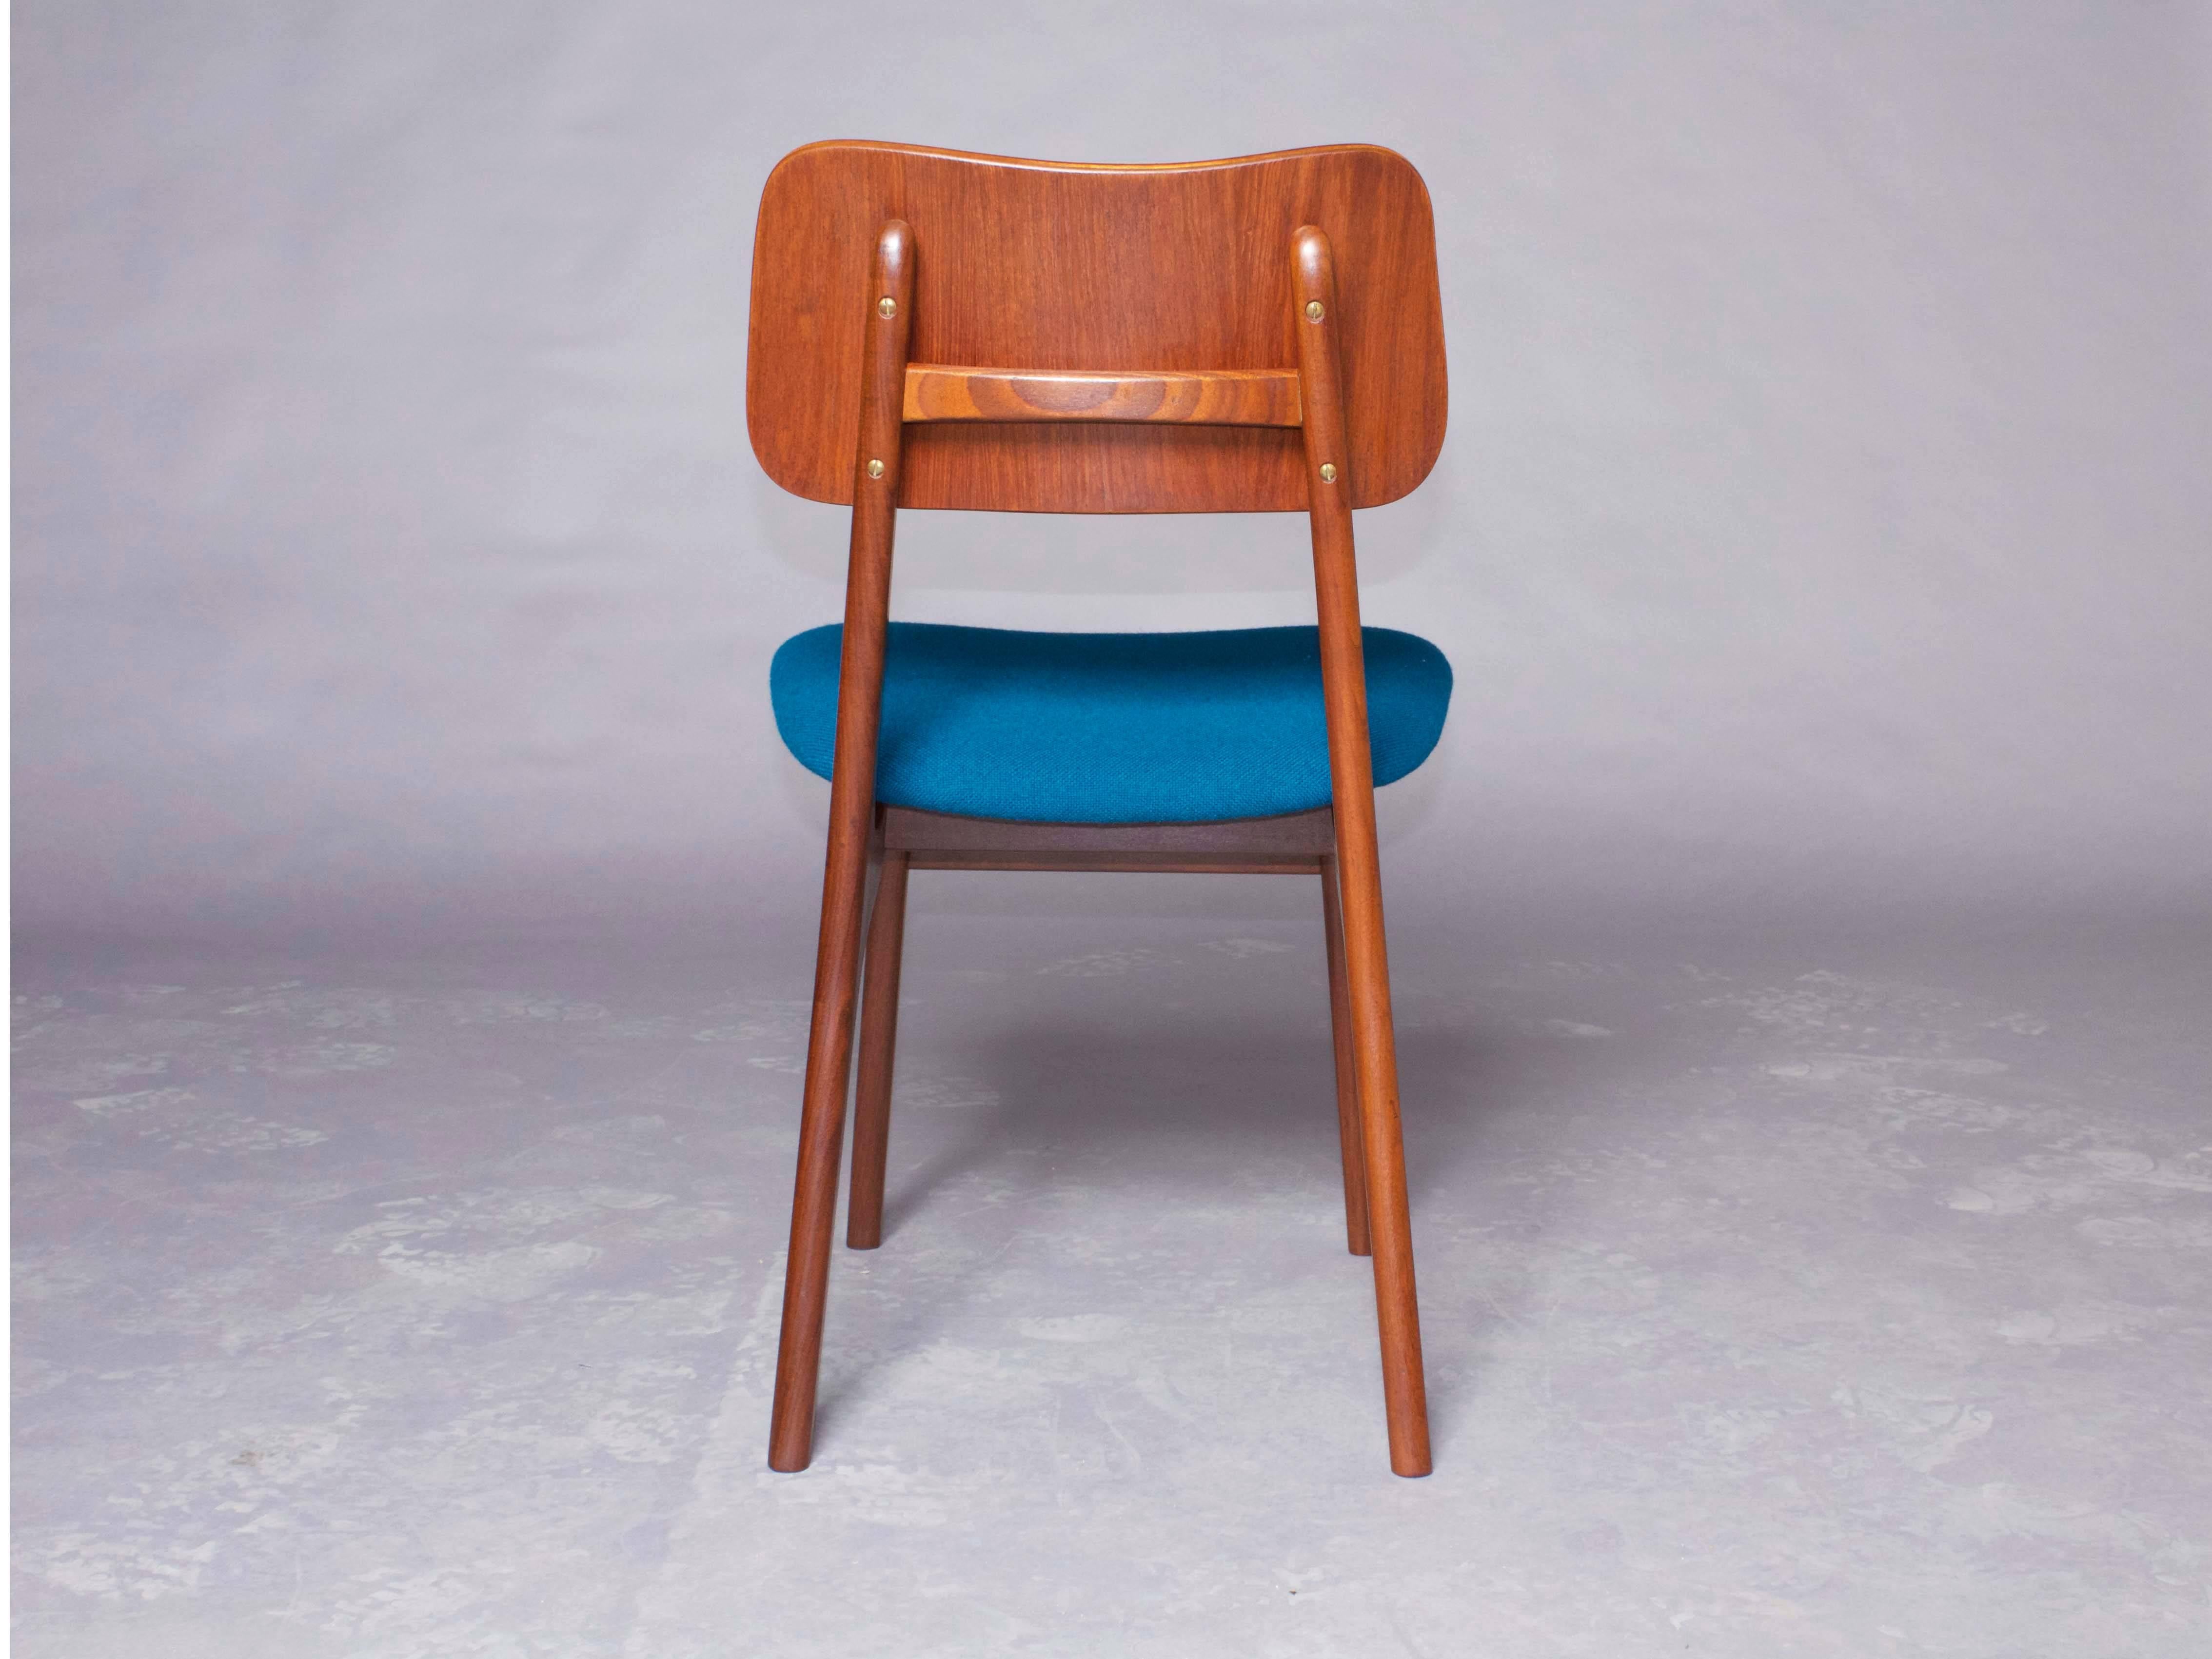 Vintage 1950s teak dining chairs from Denmark.

This set of vintage dining chairs are absolutely some of the most comfortable you will ever sit in. They have this gorgeous brass bead that connects the structure to the back of the chair. All in